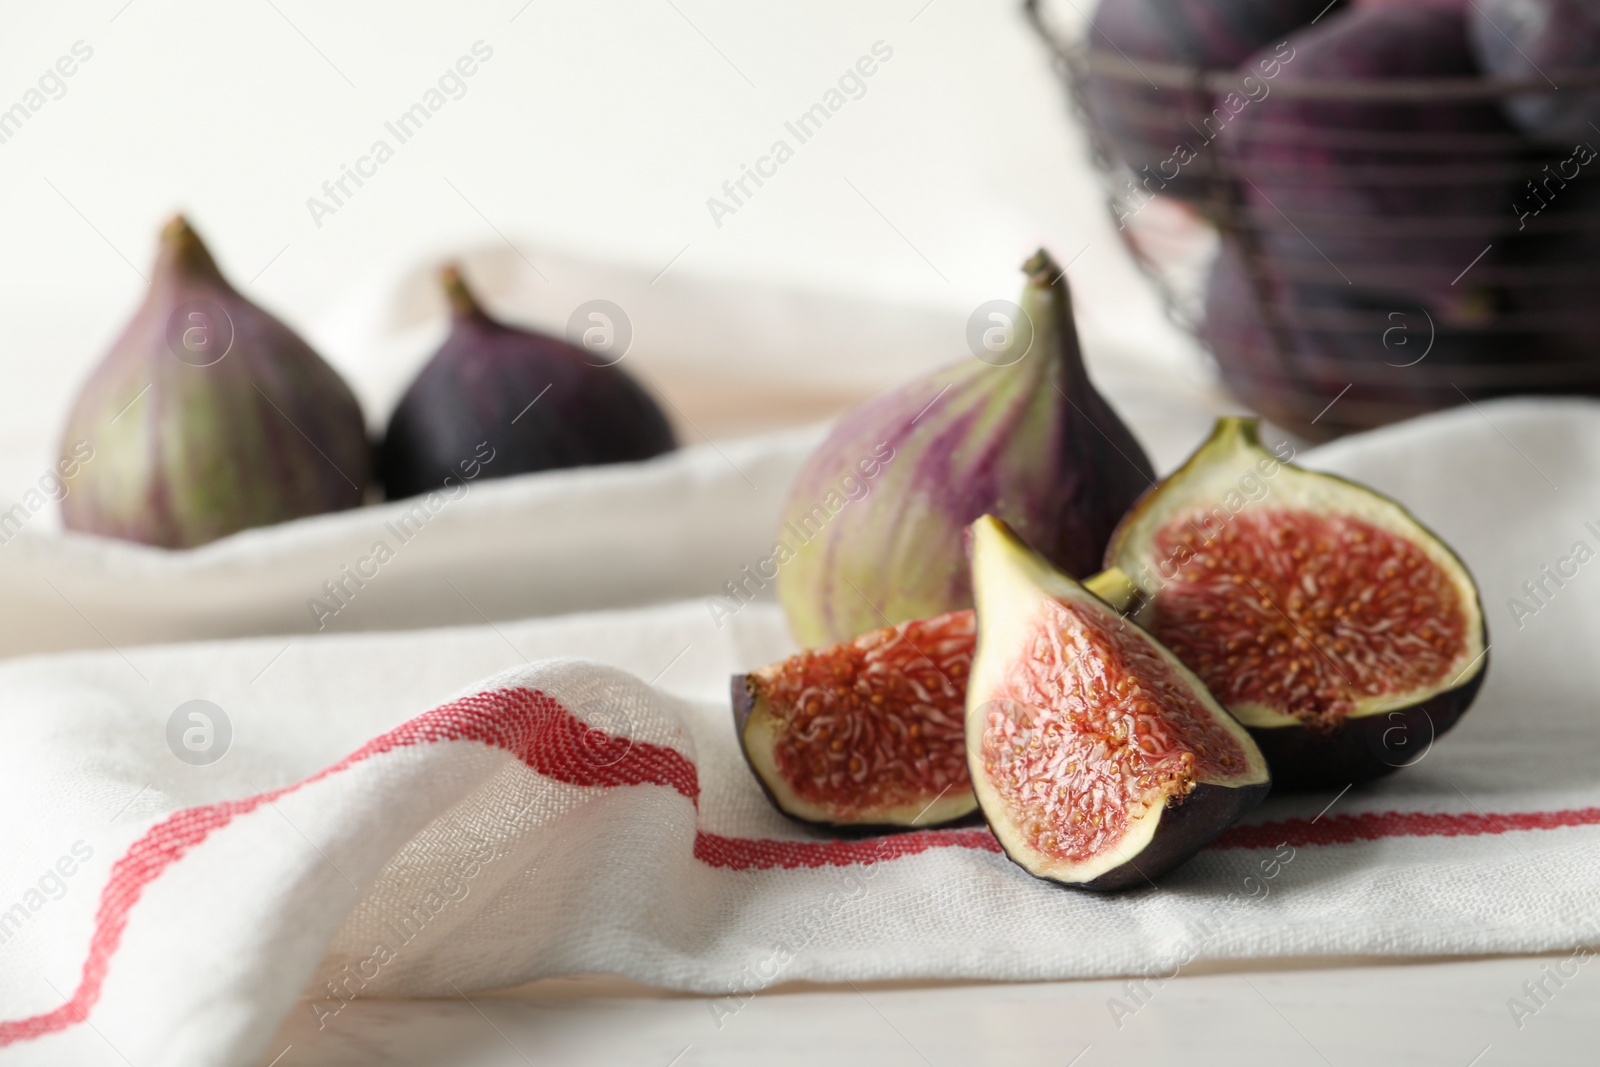 Photo of Tasty cut and whole figs on table with napkin